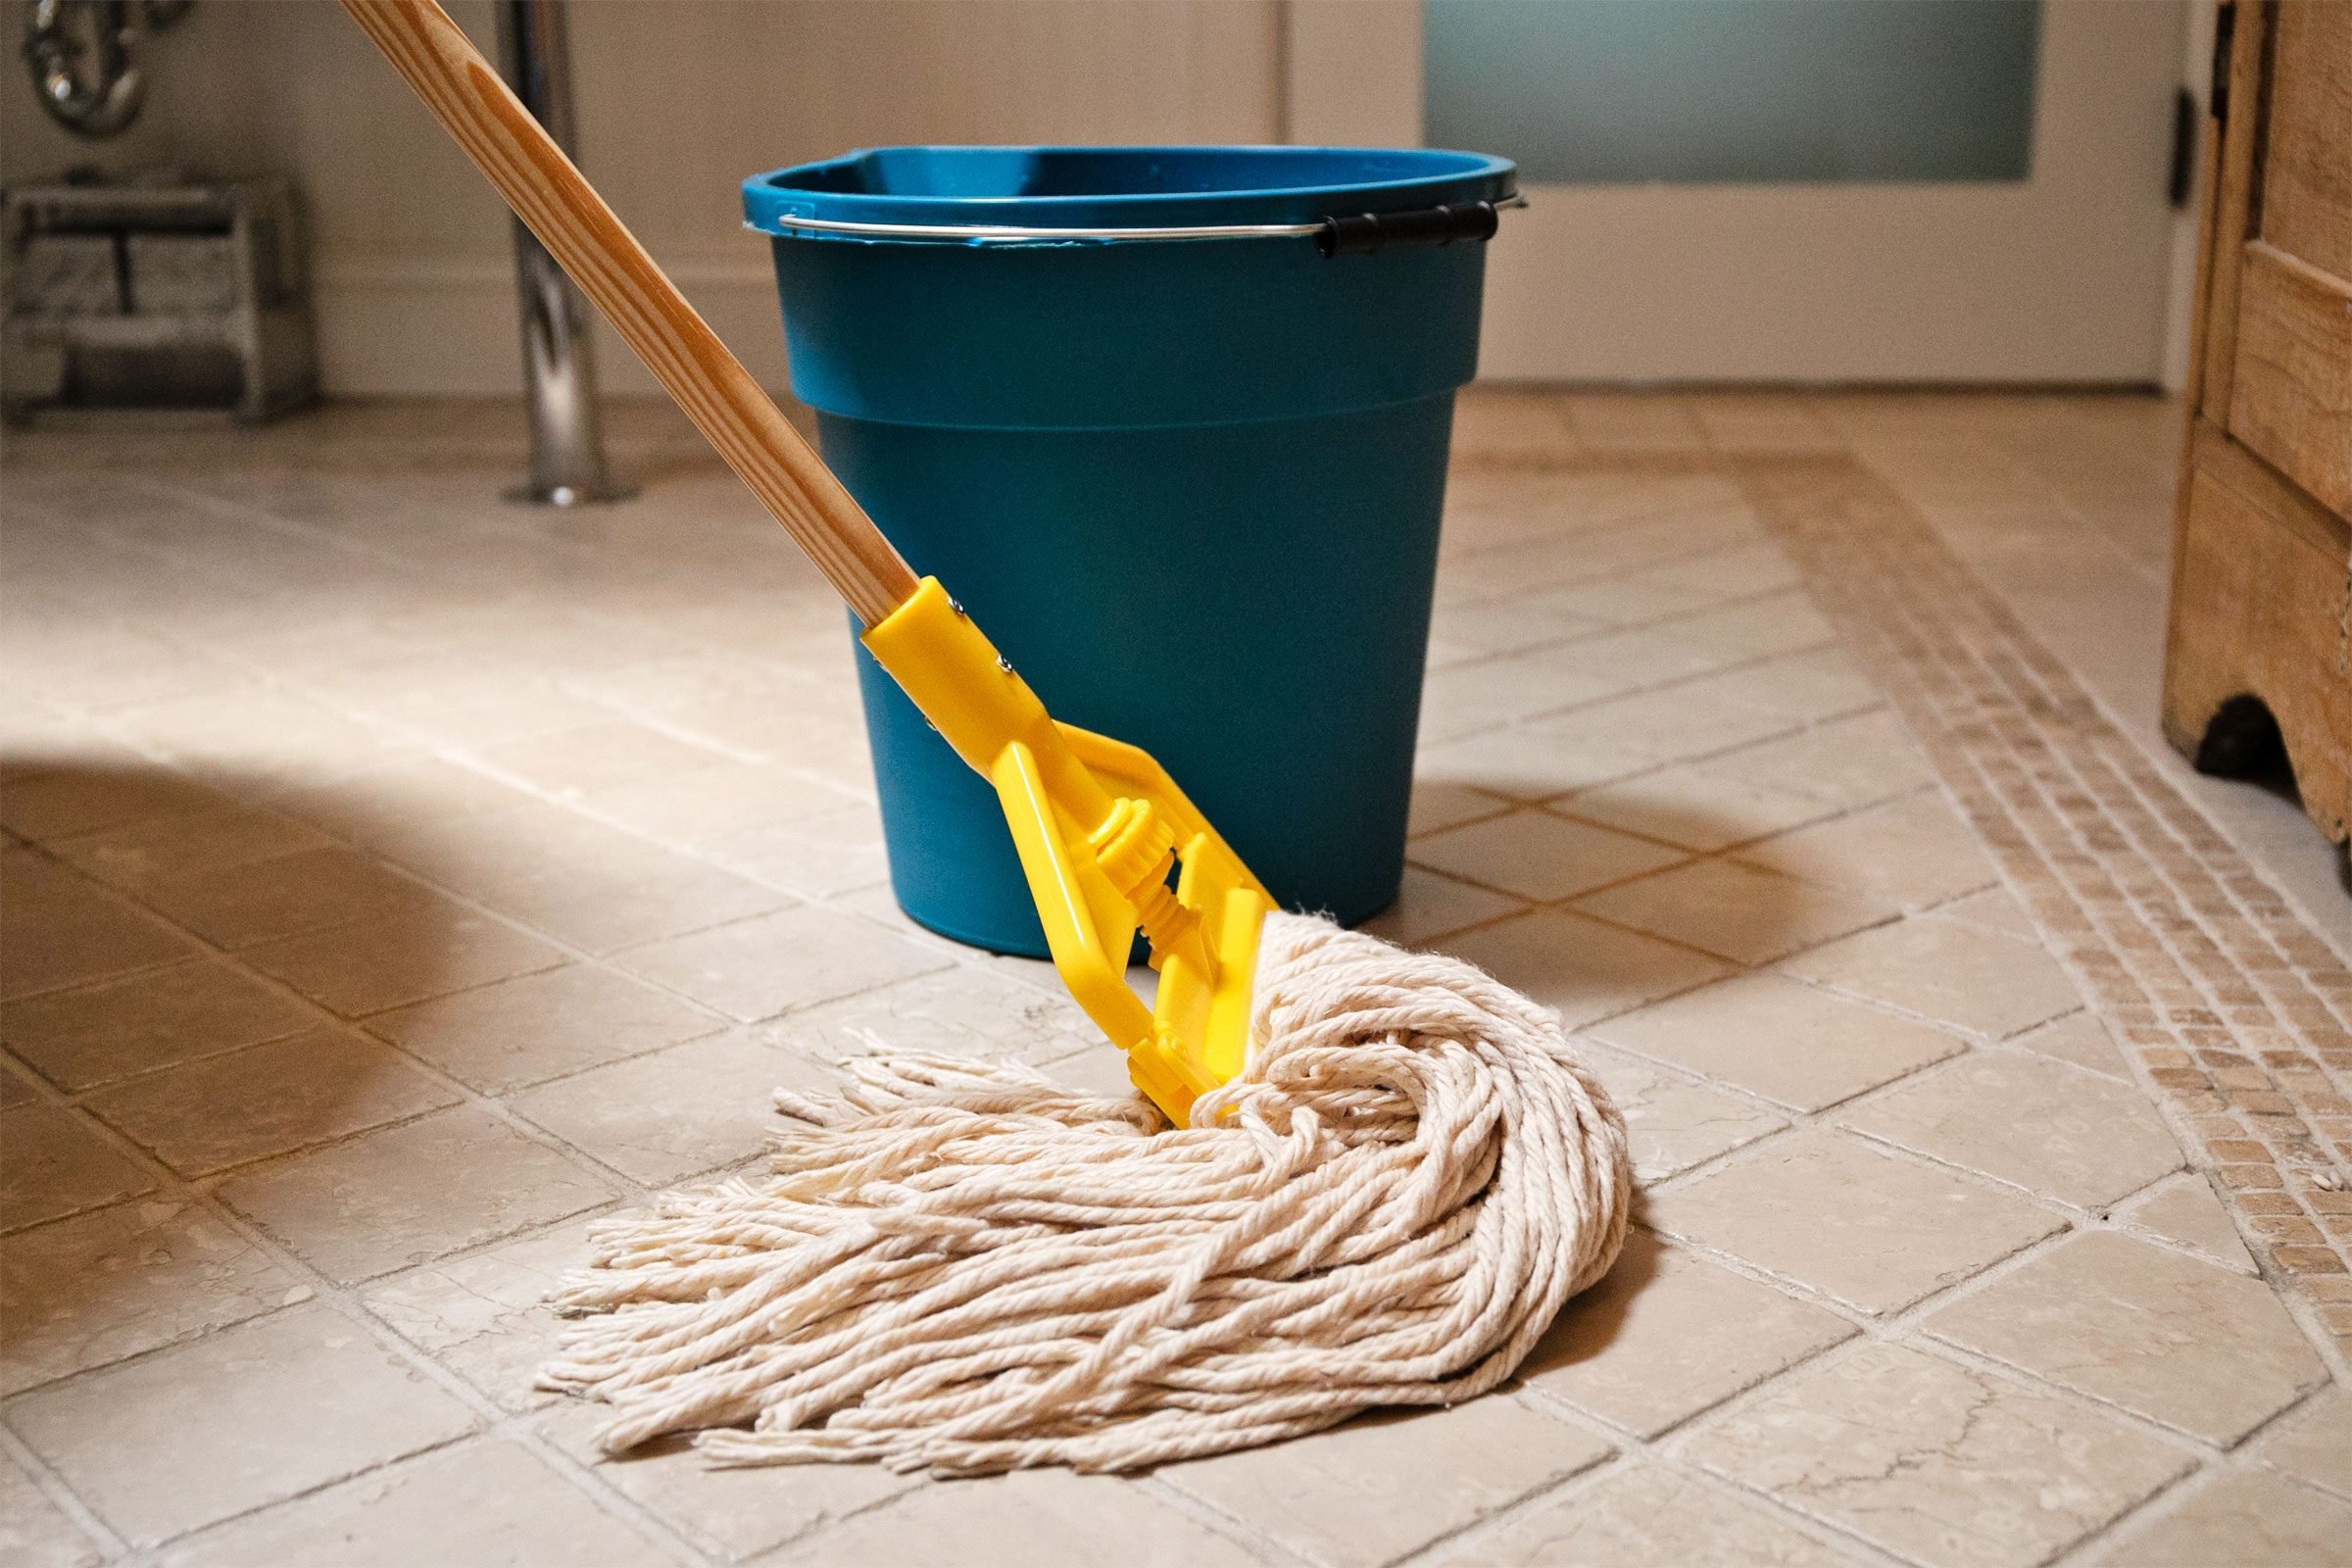 How to Mop | Step-by-Step Instructions for Hardwood, Tile, Ceramic Floors